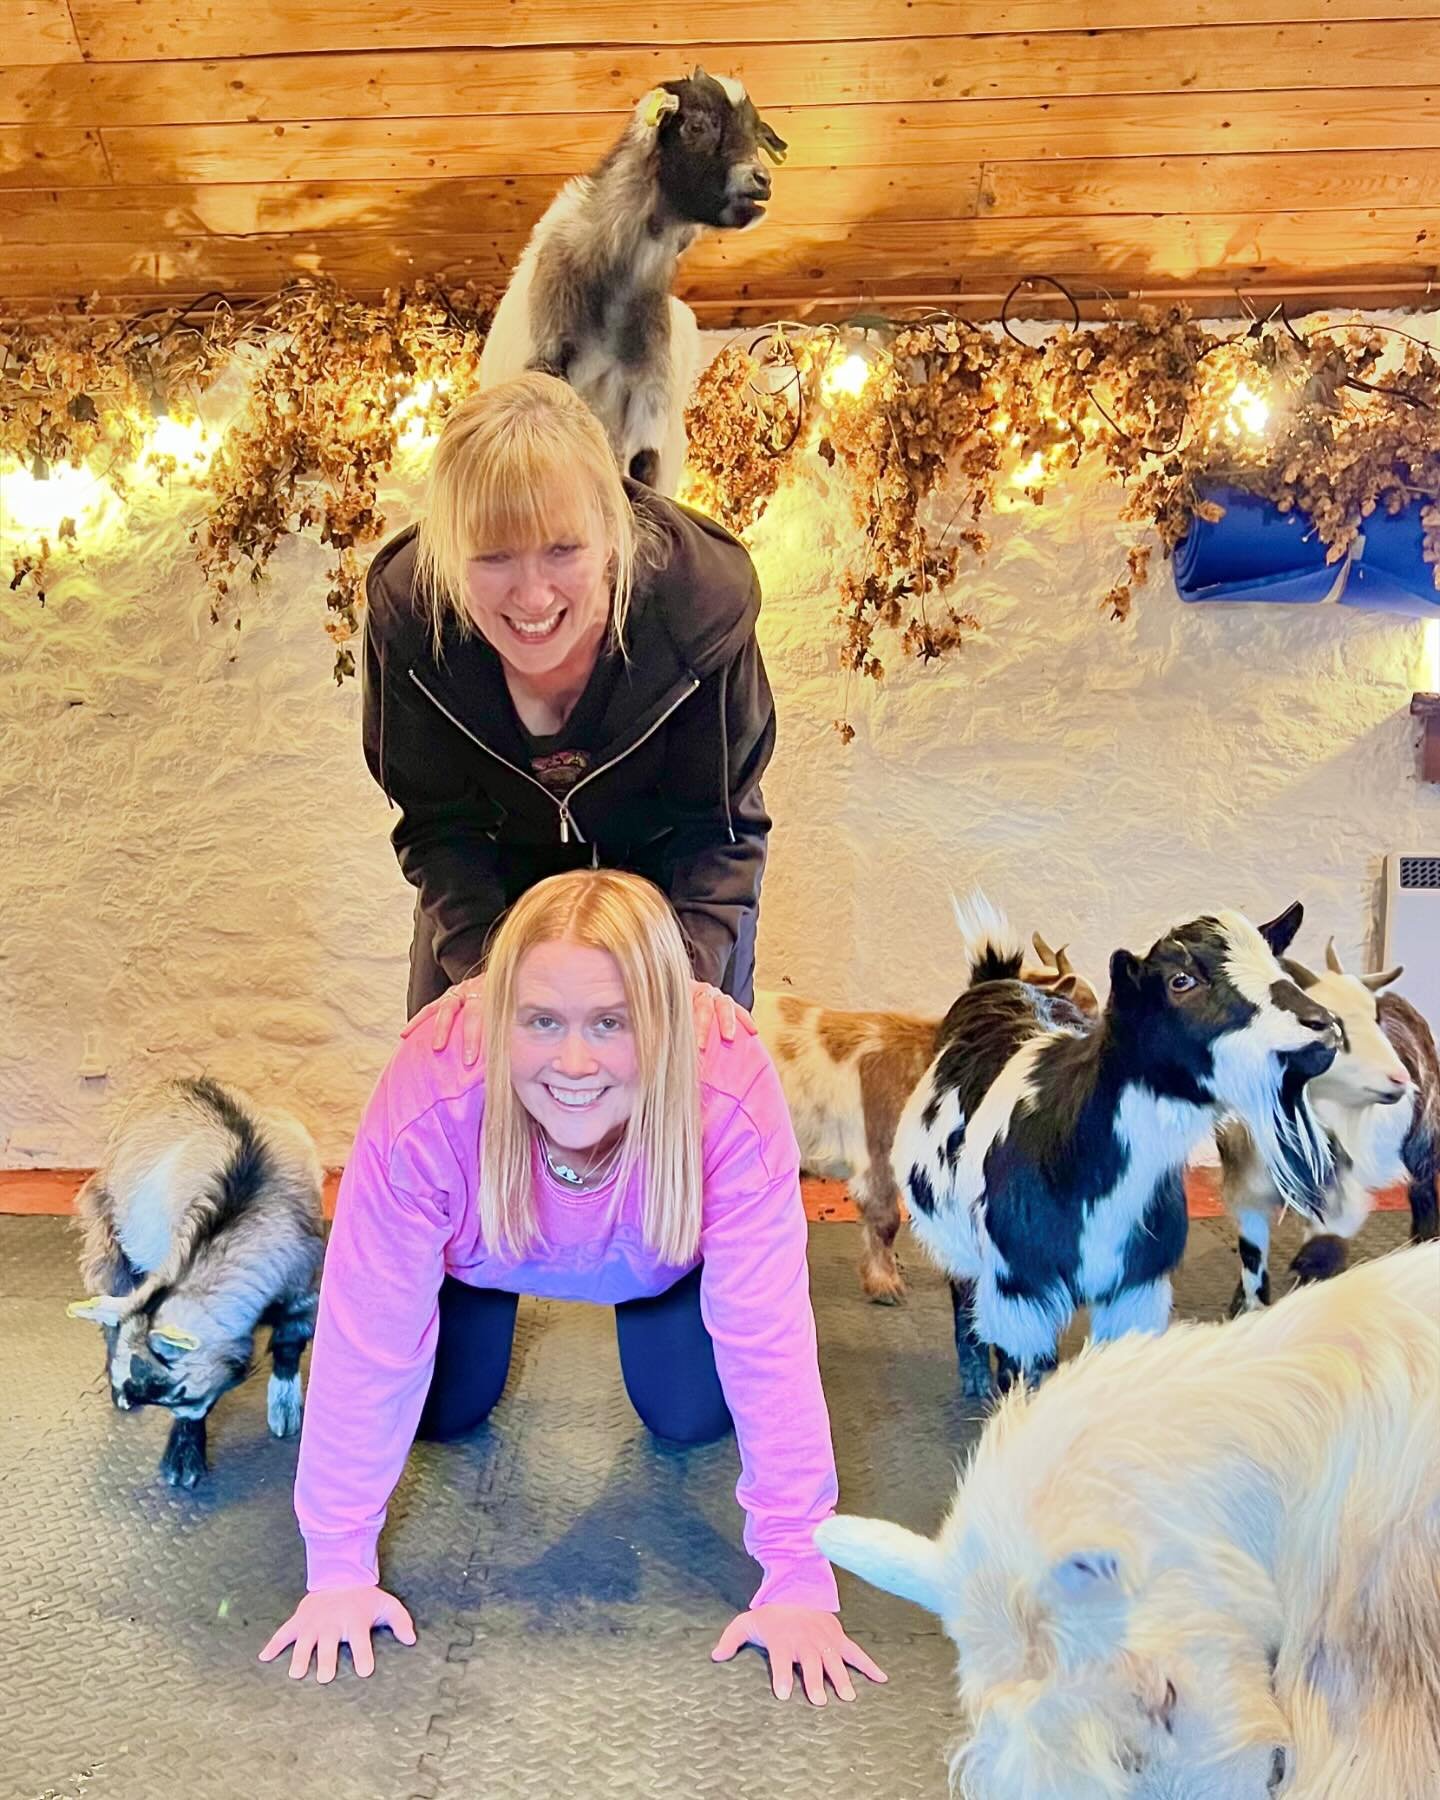 Baby Zorro had a helping hand to get on top of this tower as he&rsquo;s too wee to do it himself for now @thepilatesattic 

#babygoats #goats #pygmygoats #goatsofinstagram #goatpilates #pygmygoatpilates #goatyoga #edinburgh #fife #scotland #animalexp